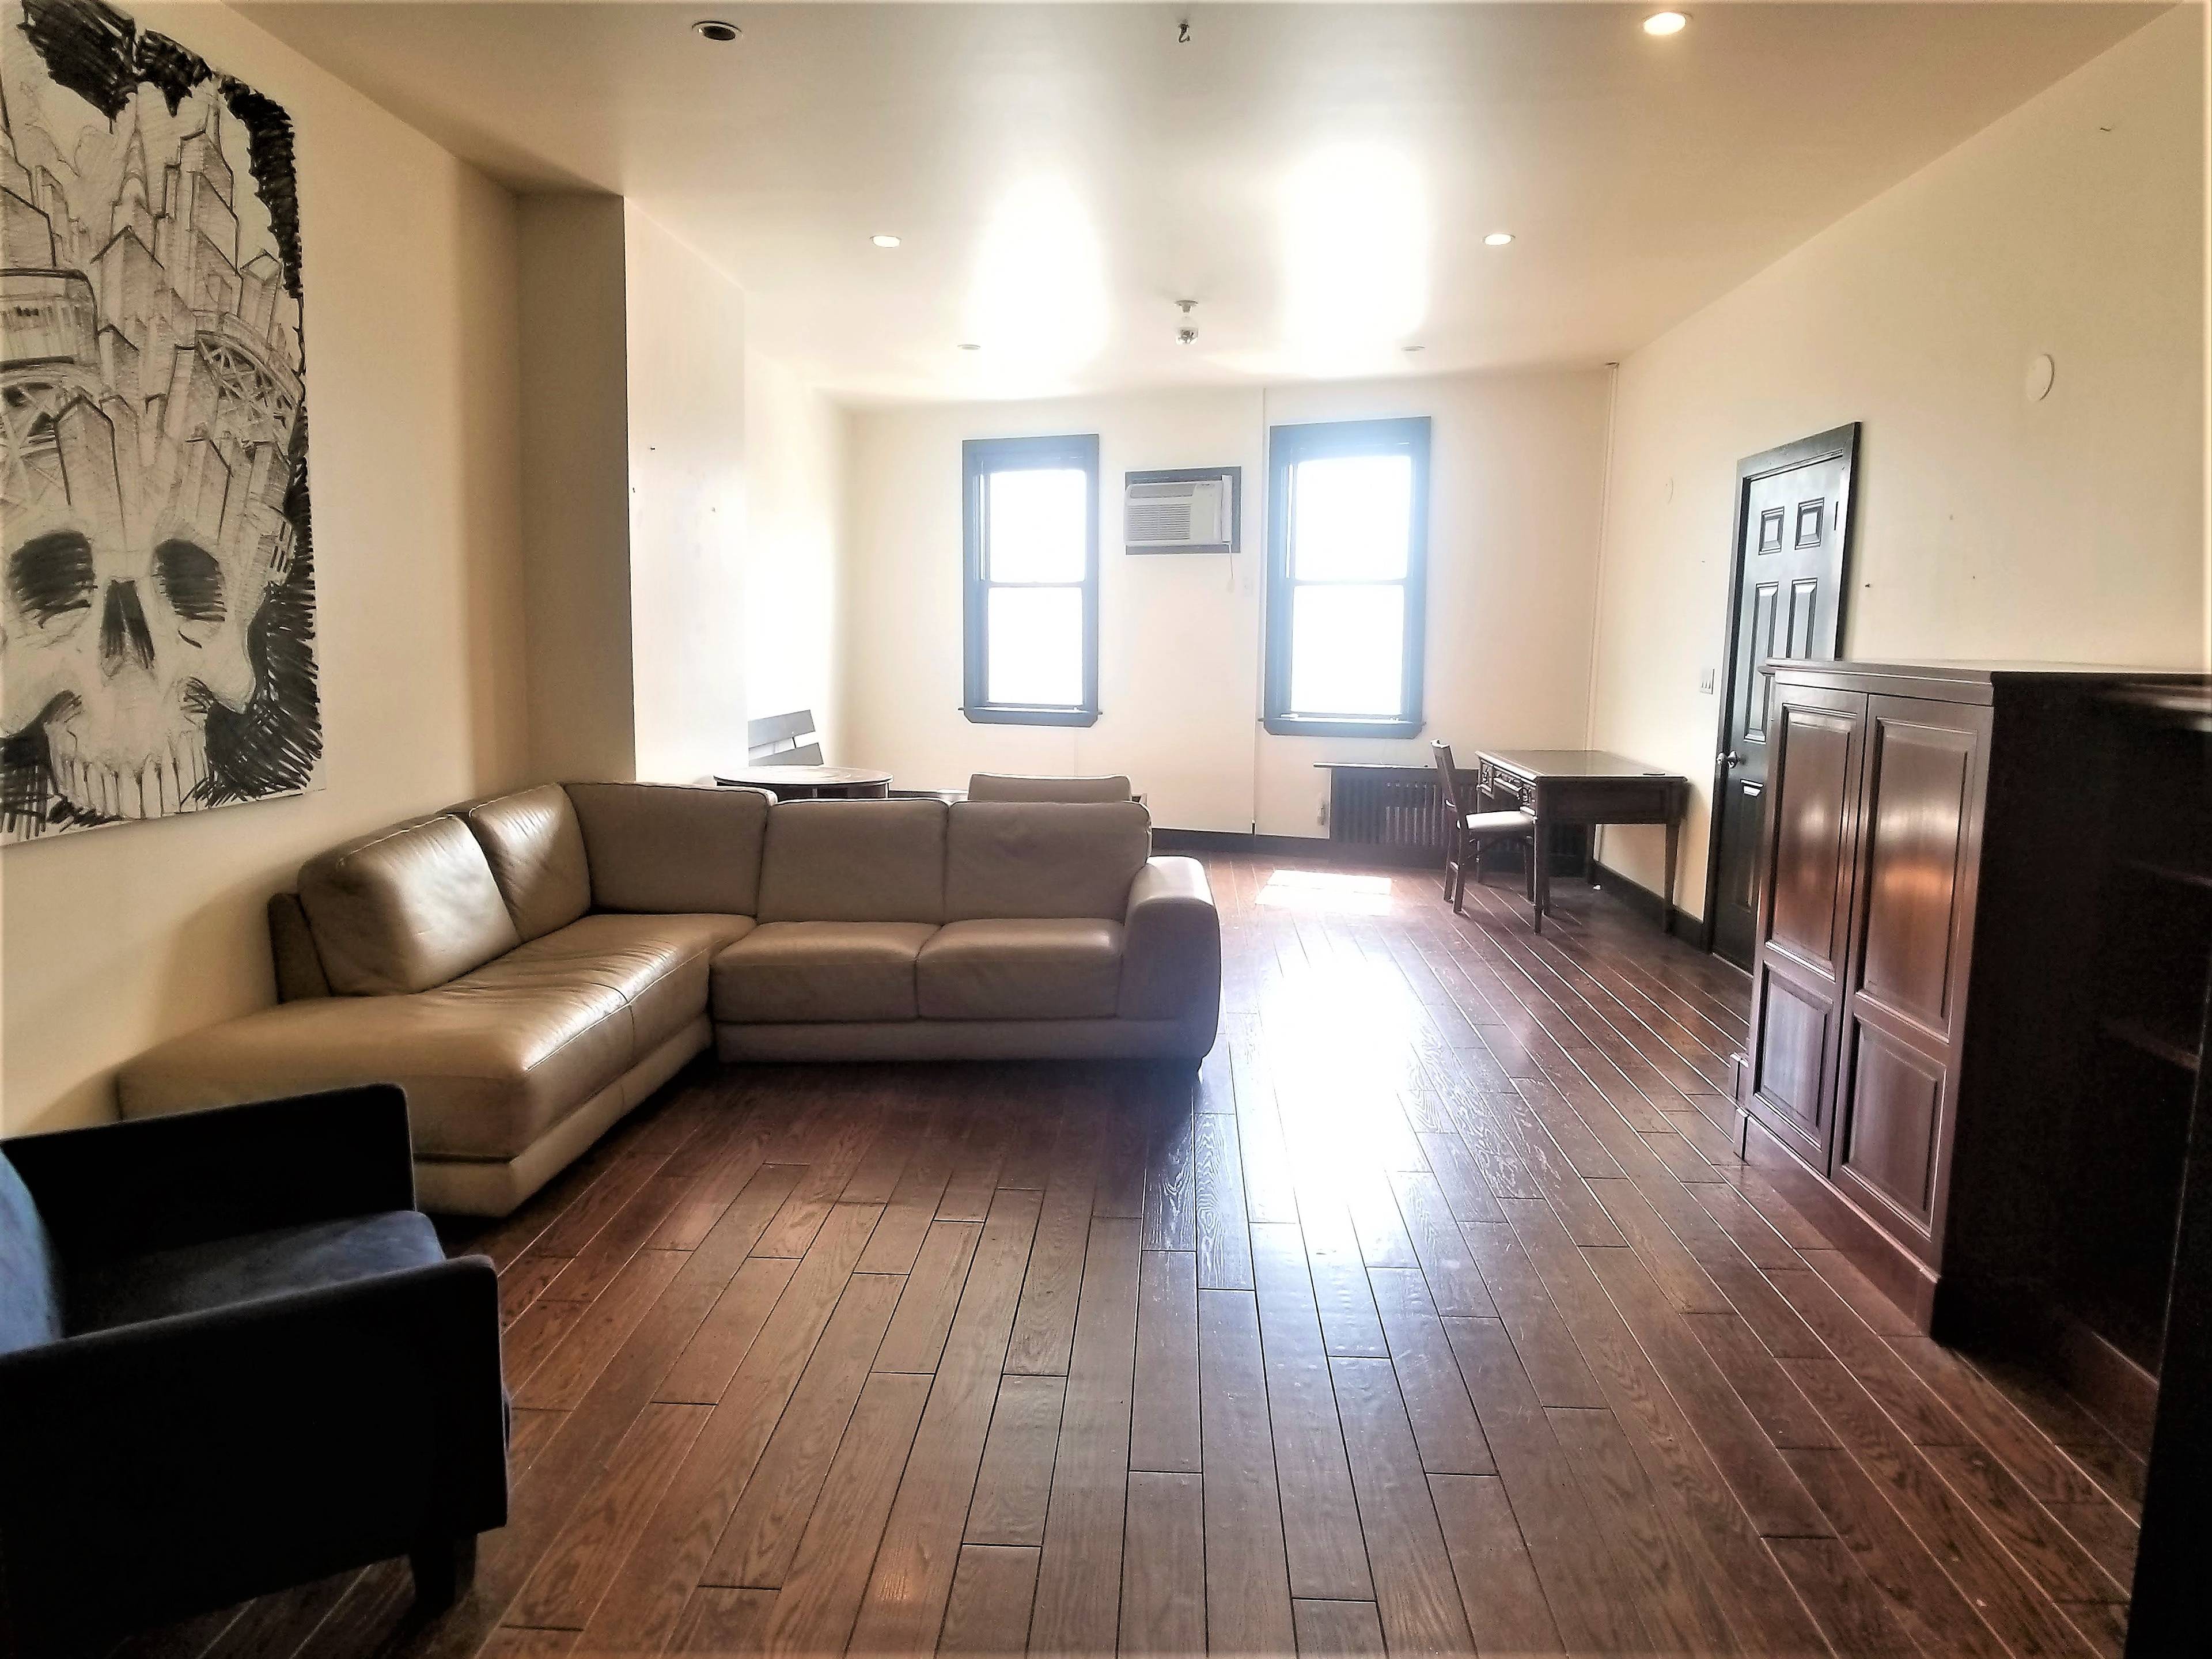 Live Luxuriously in this Lavish, Full floor,  2BR Loft in the heart of Williamsburg!